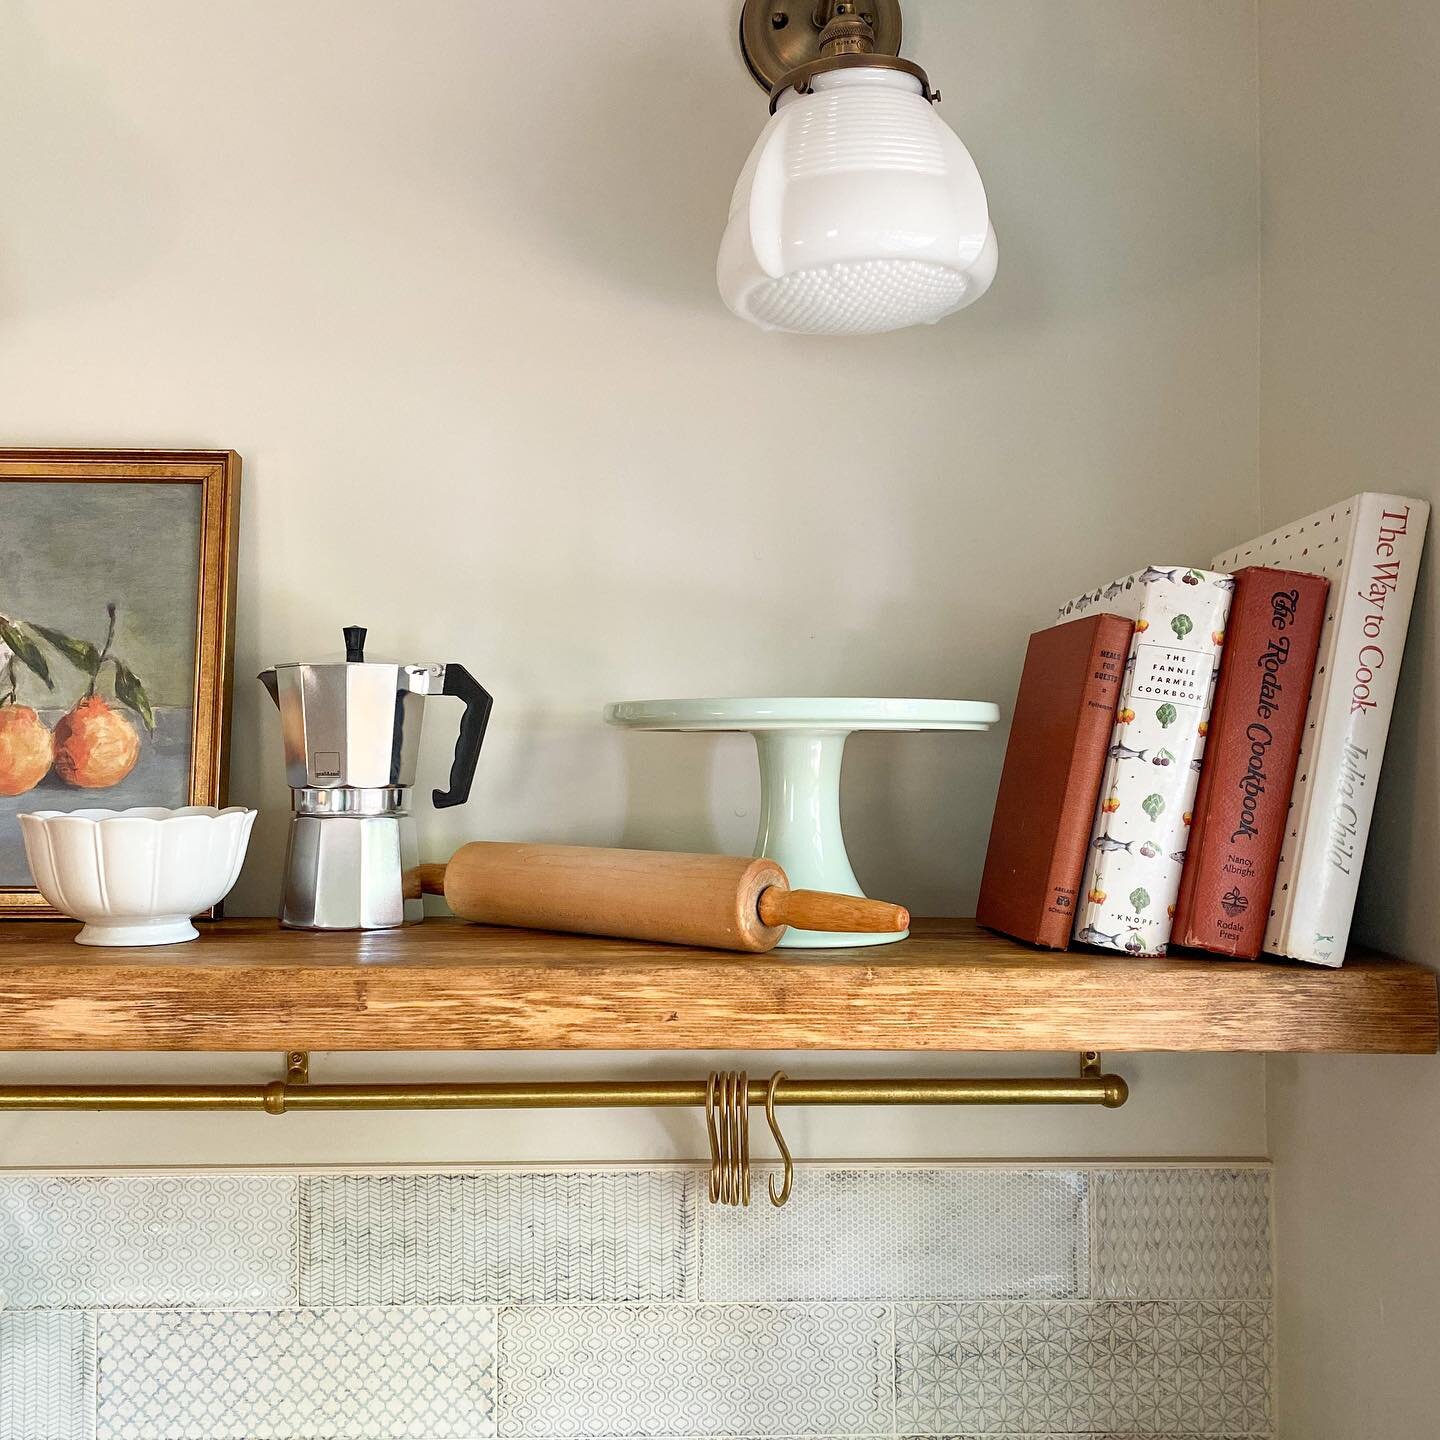 When staging a house, I want it to feel as much like a lived in and loved home as possible. 
When using items like this @wandajunehome cake stand, it&rsquo;s not only beautiful, but it creates a homey feel. I also may or may no have presented a real 